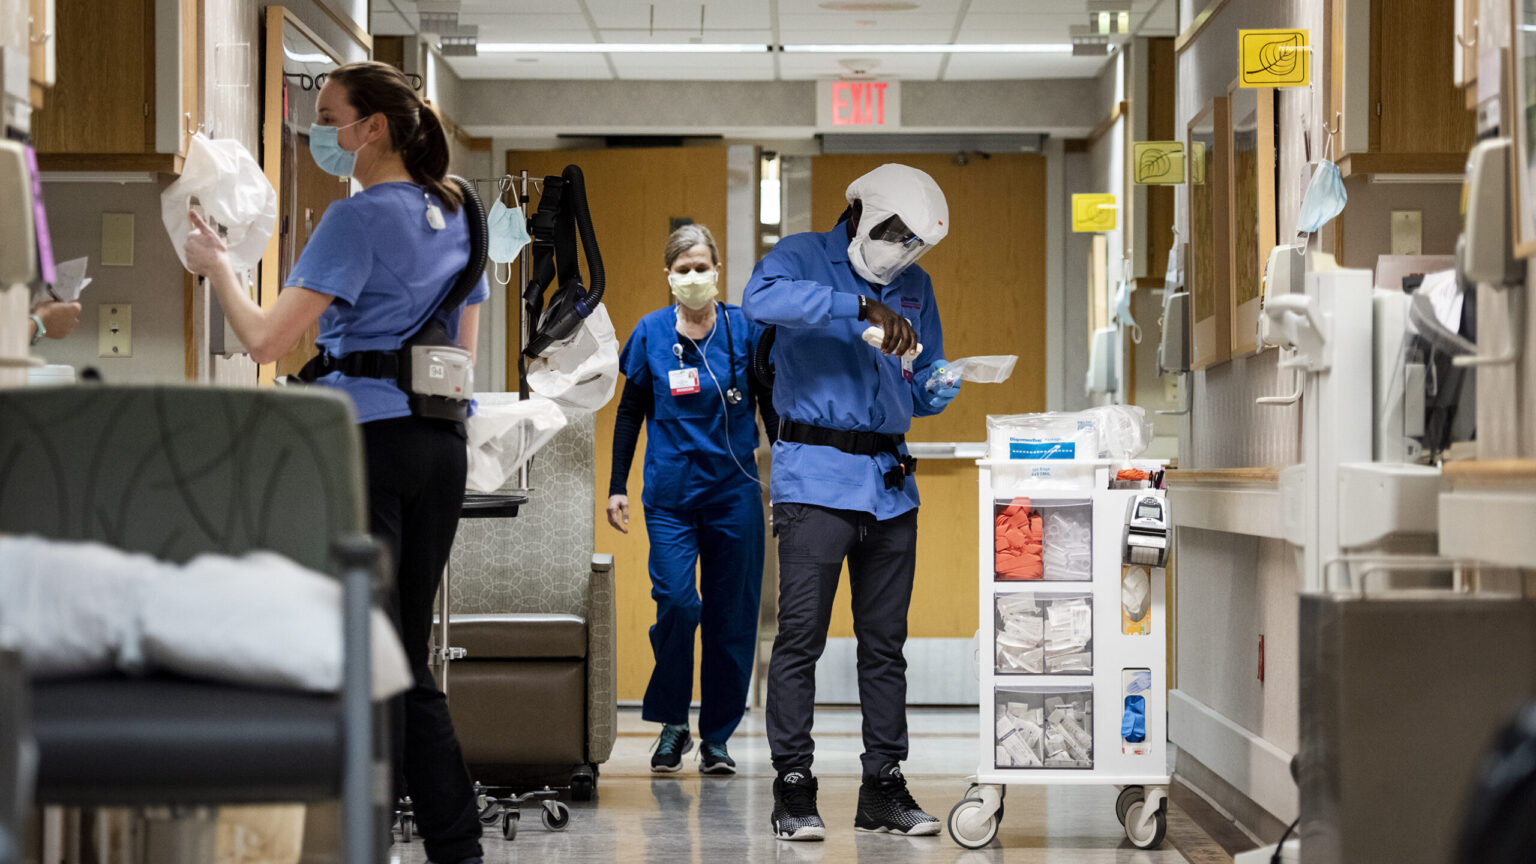 Healthcare workers wearing masks in a hospital hallway